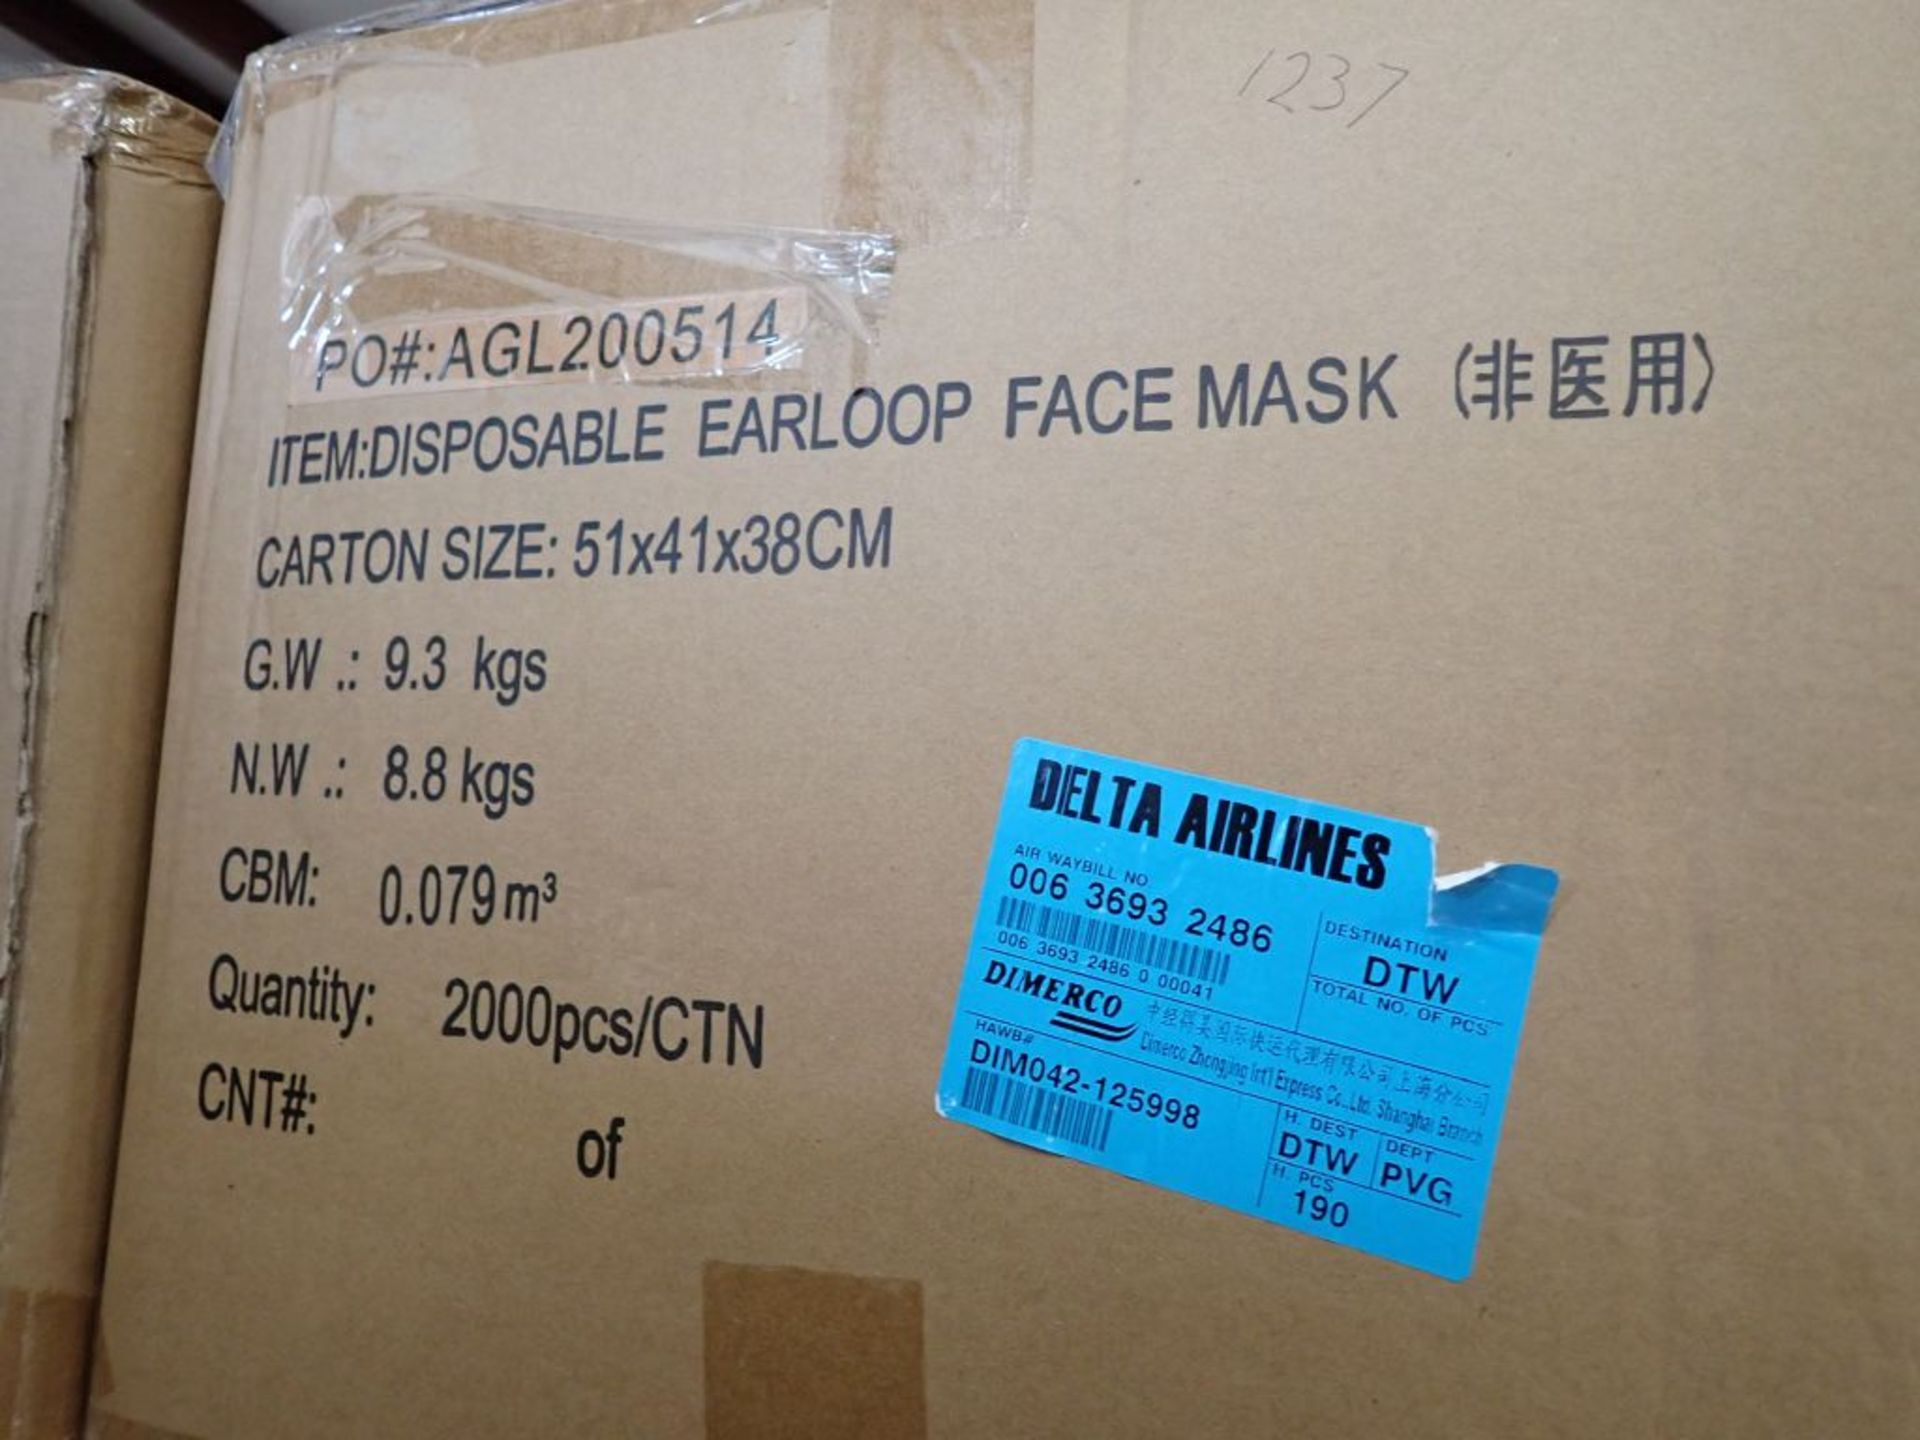 Lot of (48,000) Disposable Earloop Face Mask - Image 3 of 4